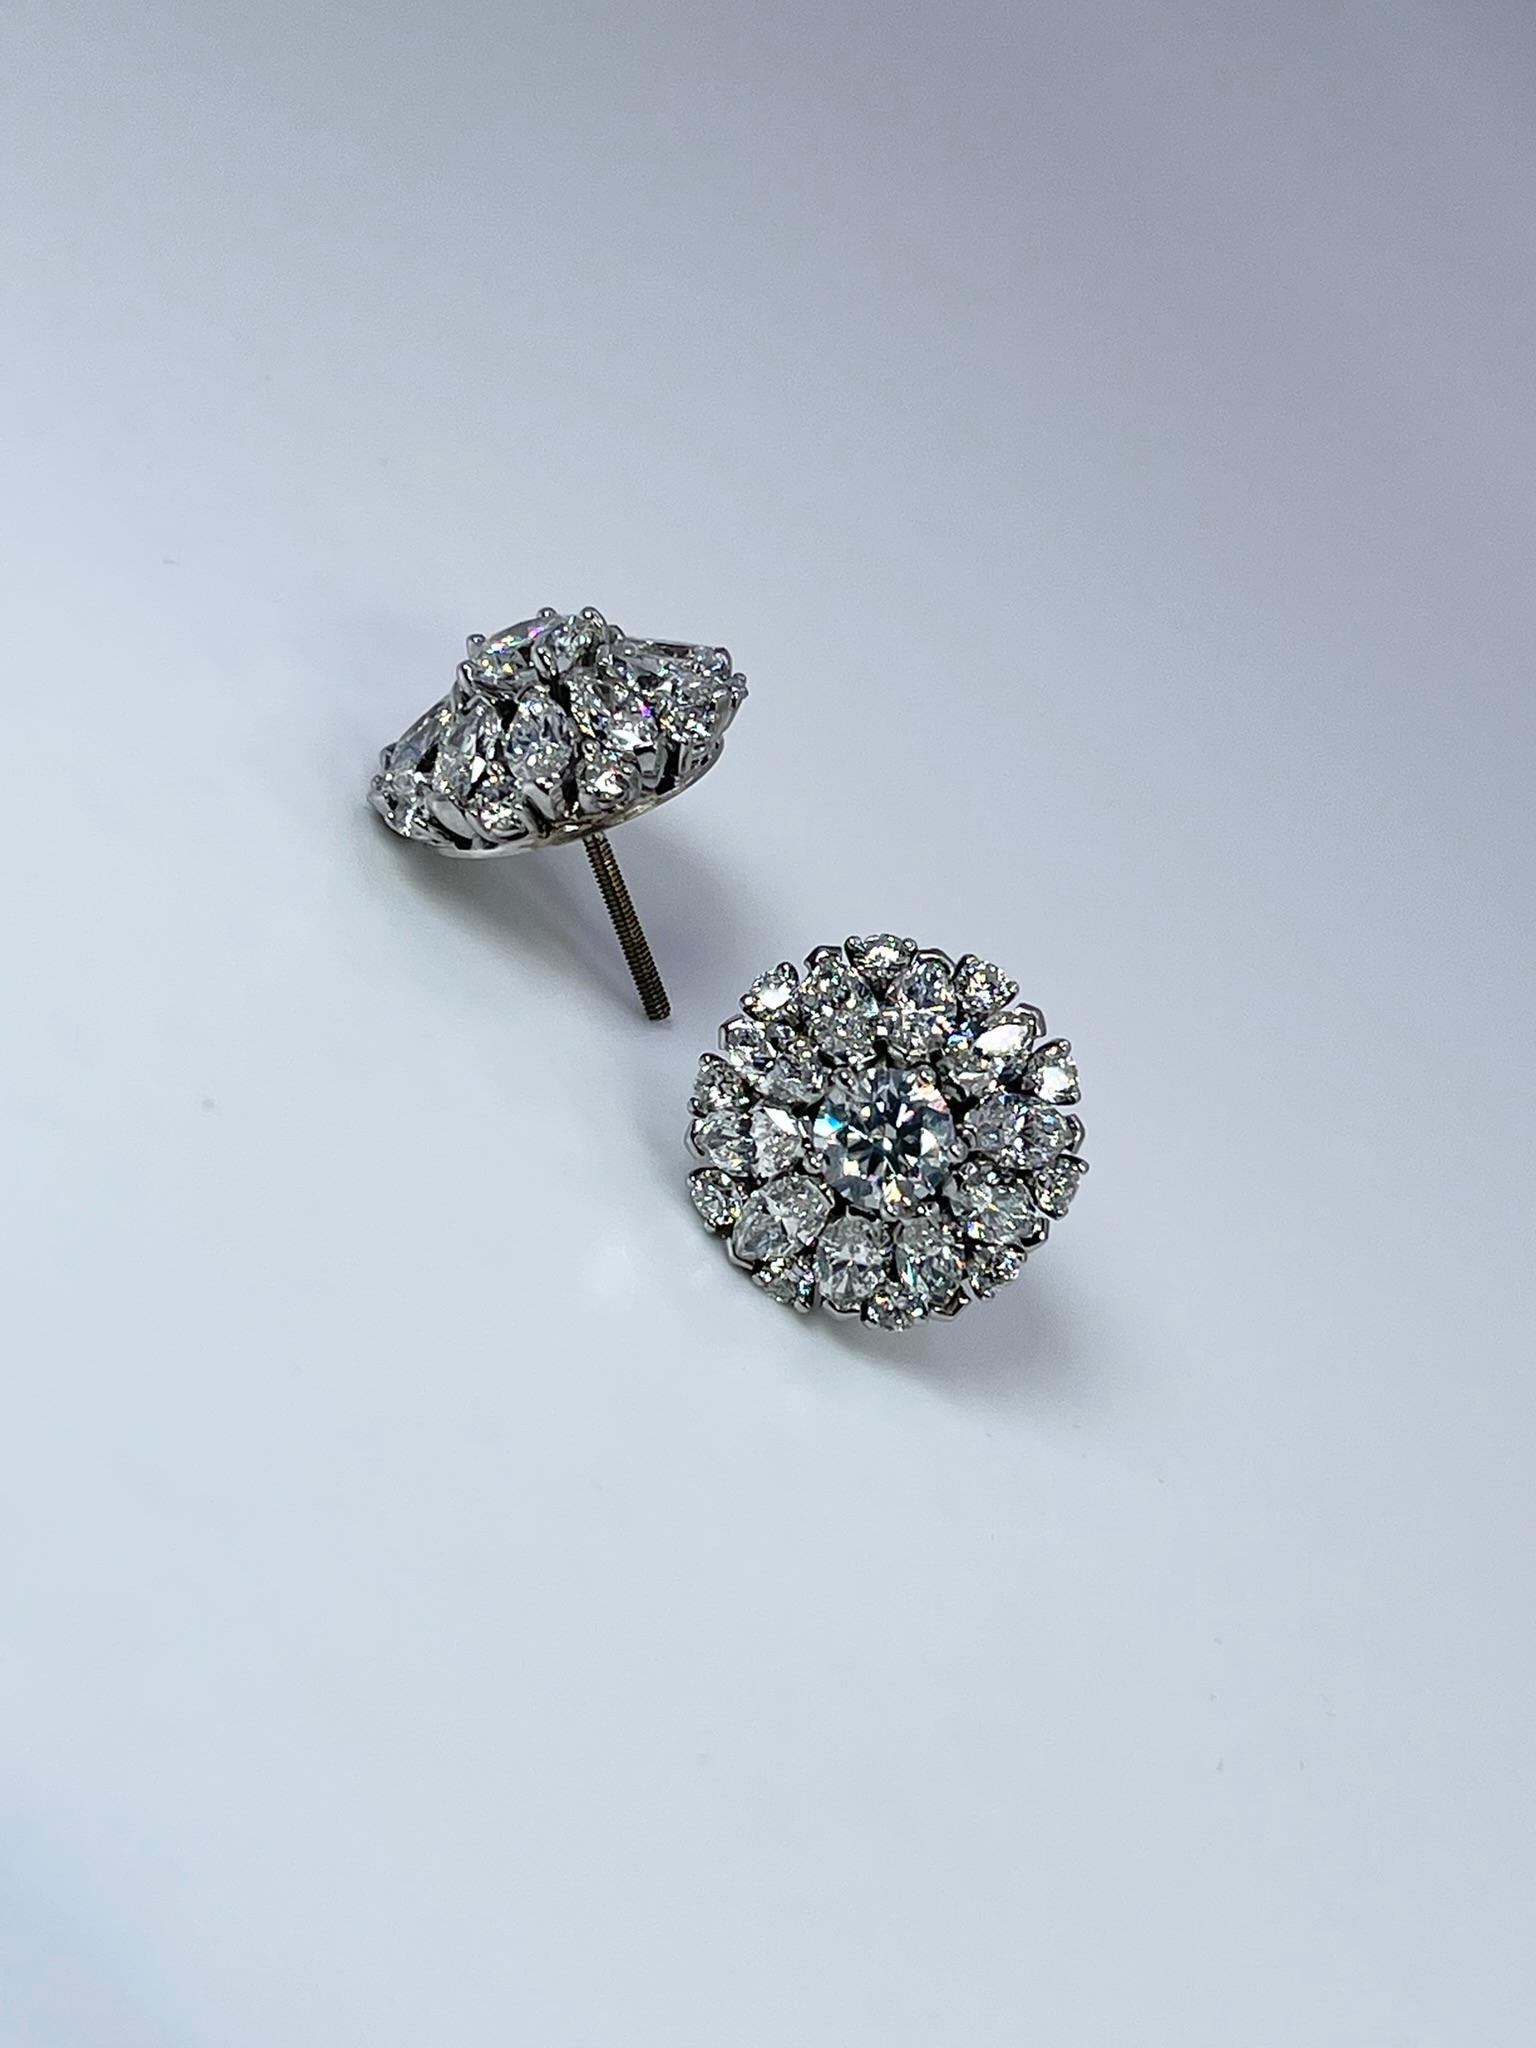 Luxurious cocktail diamonds earrings made with 6.30 carats of diamonds. The center two diamonds are weighing 1.75 carats. These earrings are 0.61 inches in diameter.

CENTER STONE: NATURAL DIAMONDS
CARAT: 1.75CT
CLARITY: VVS-VS
COLOR: E-F
CUT: ROUND